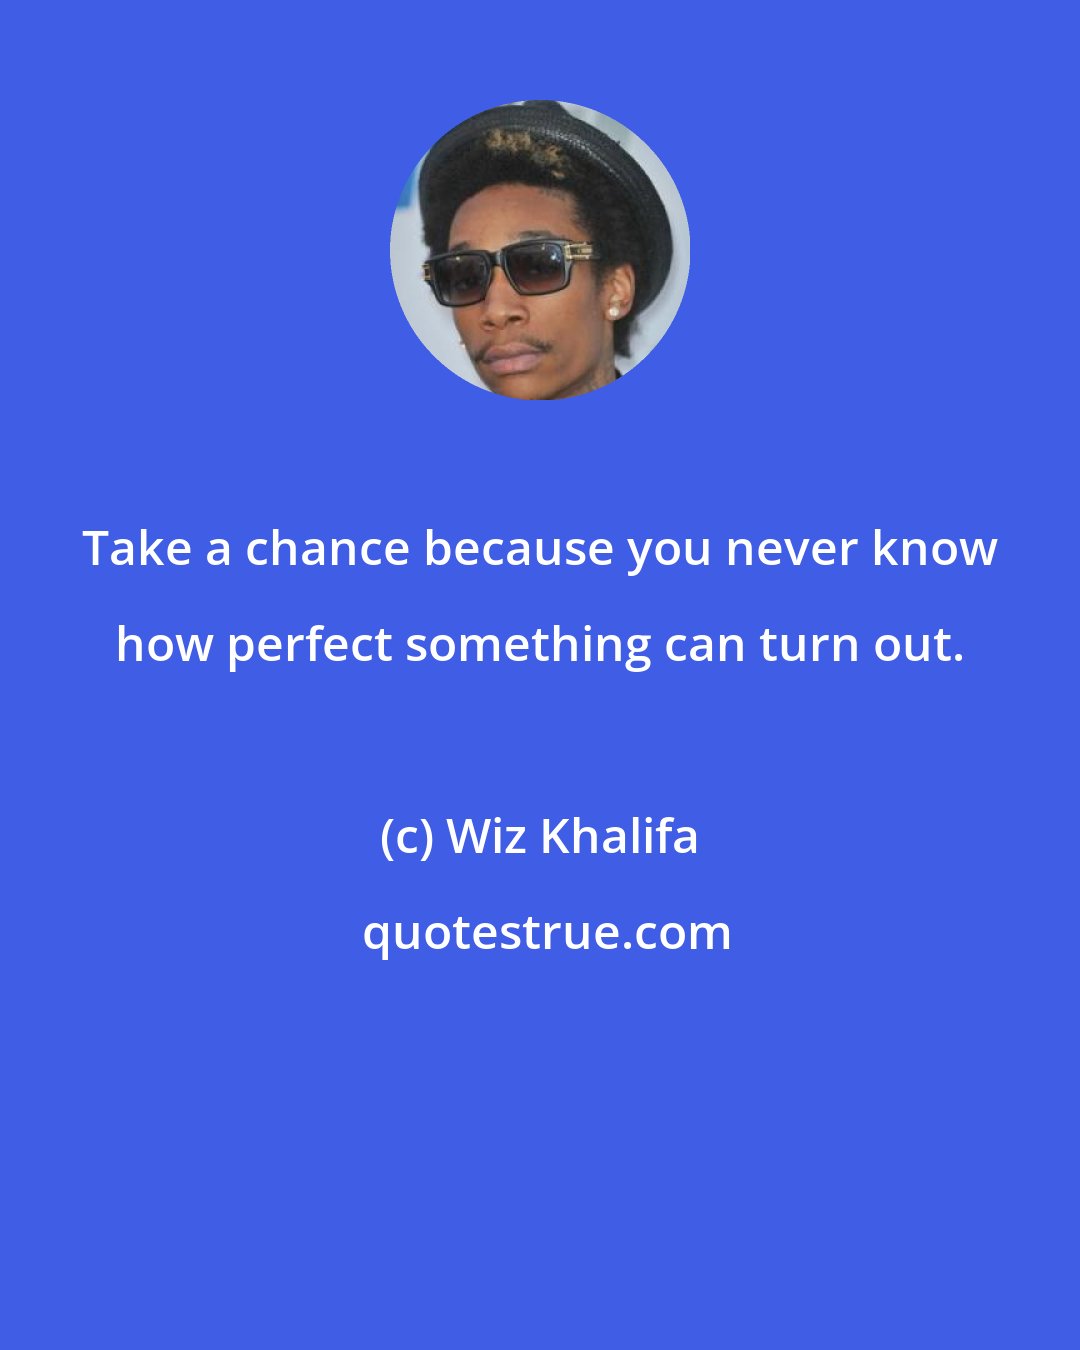 Wiz Khalifa: Take a chance because you never know how perfect something can turn out.